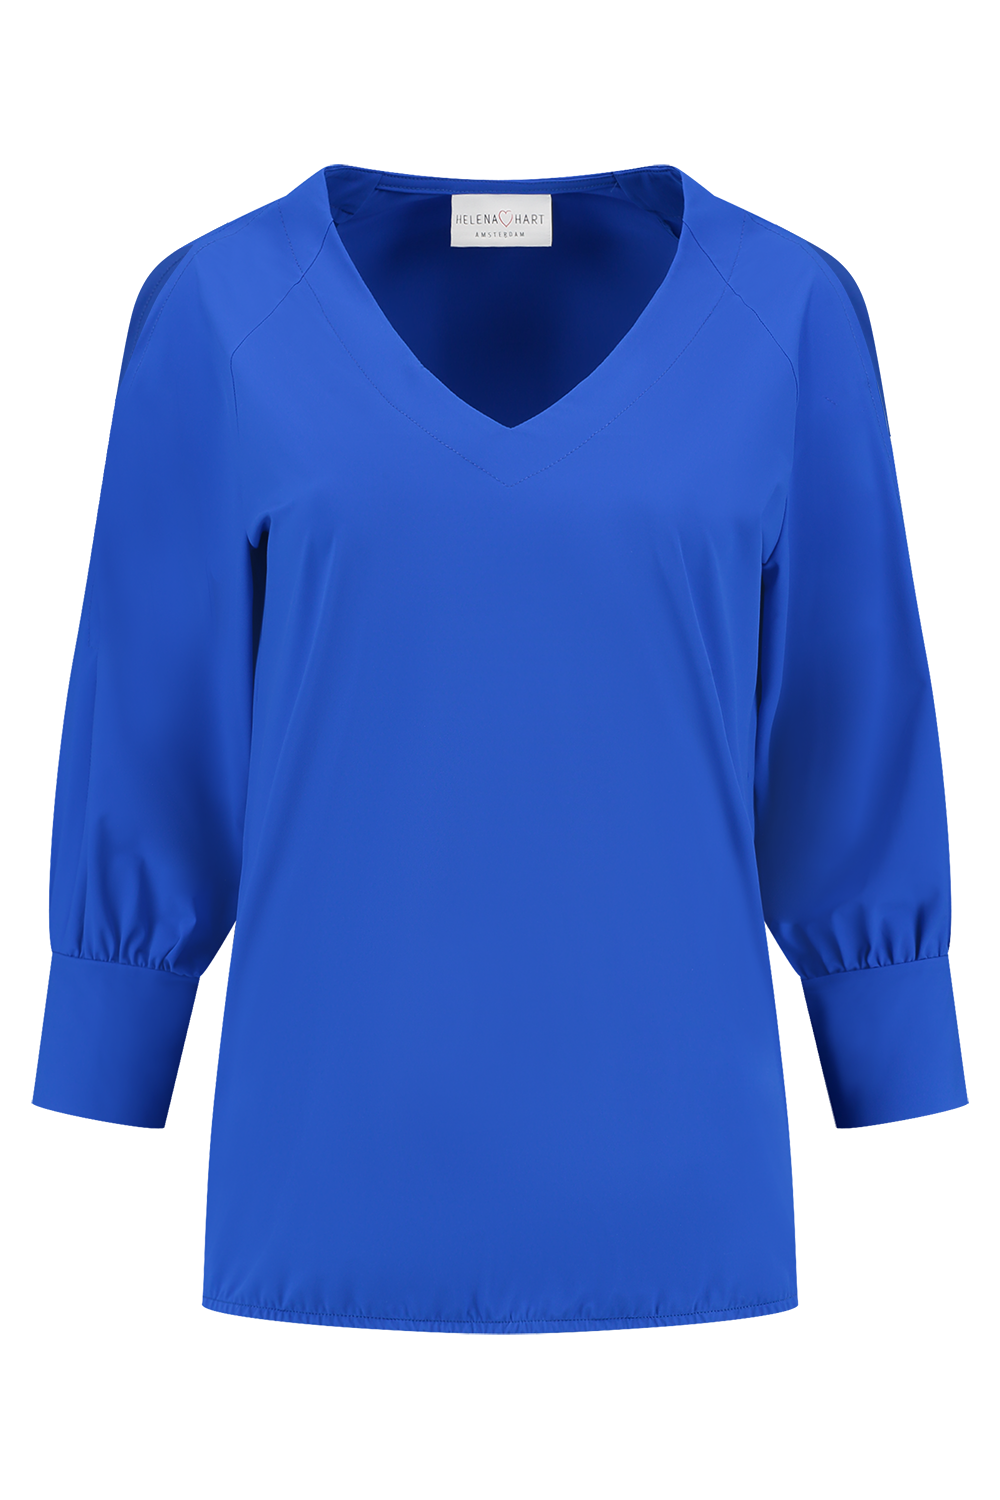 Top Hollie Transfer Electric Blue